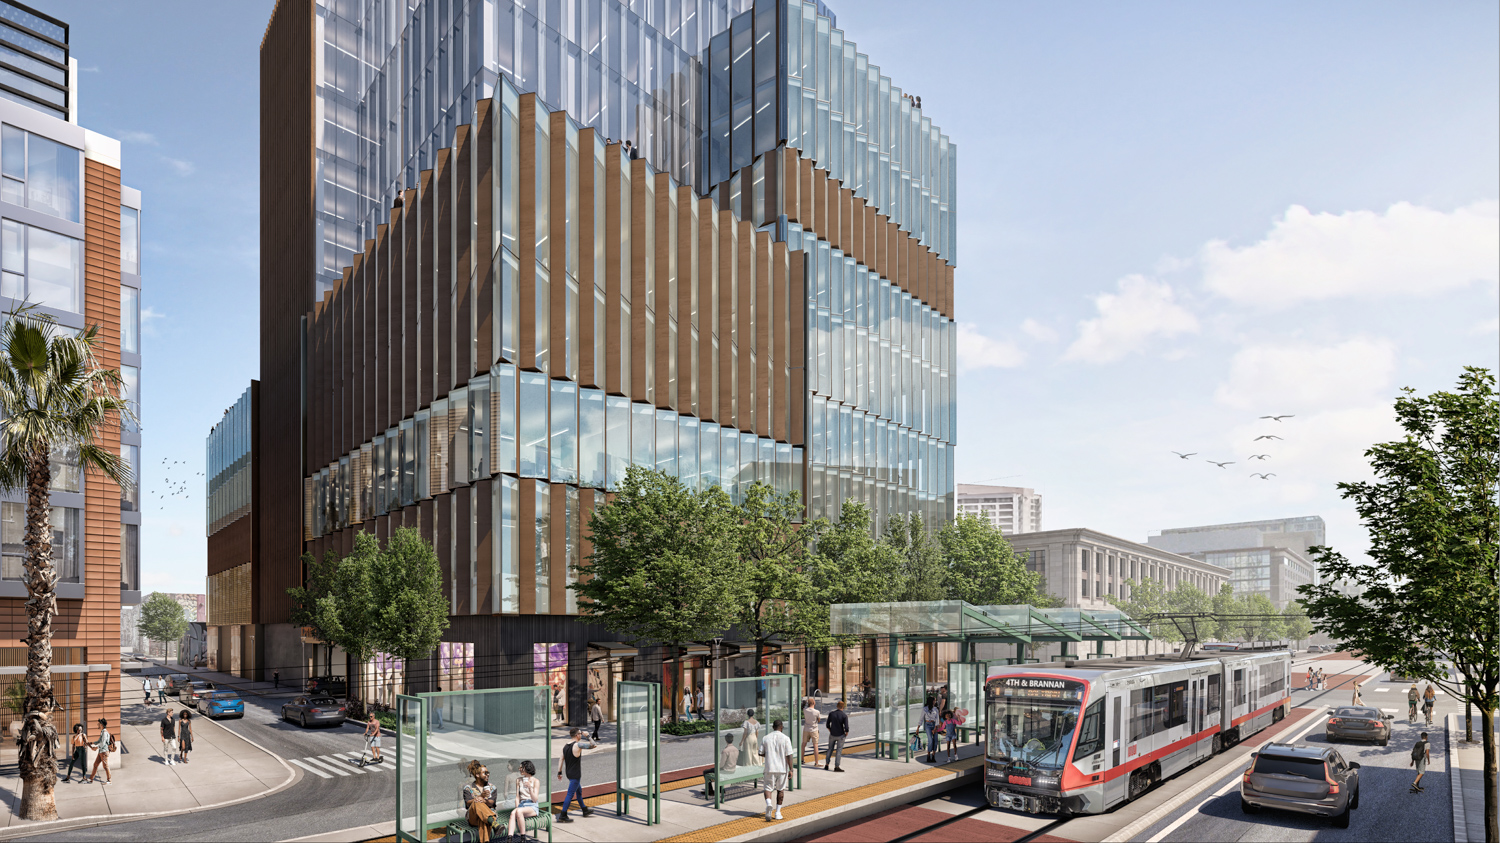 490 Brannan Street overlooking the light rail station, rendering by Perkins&Will